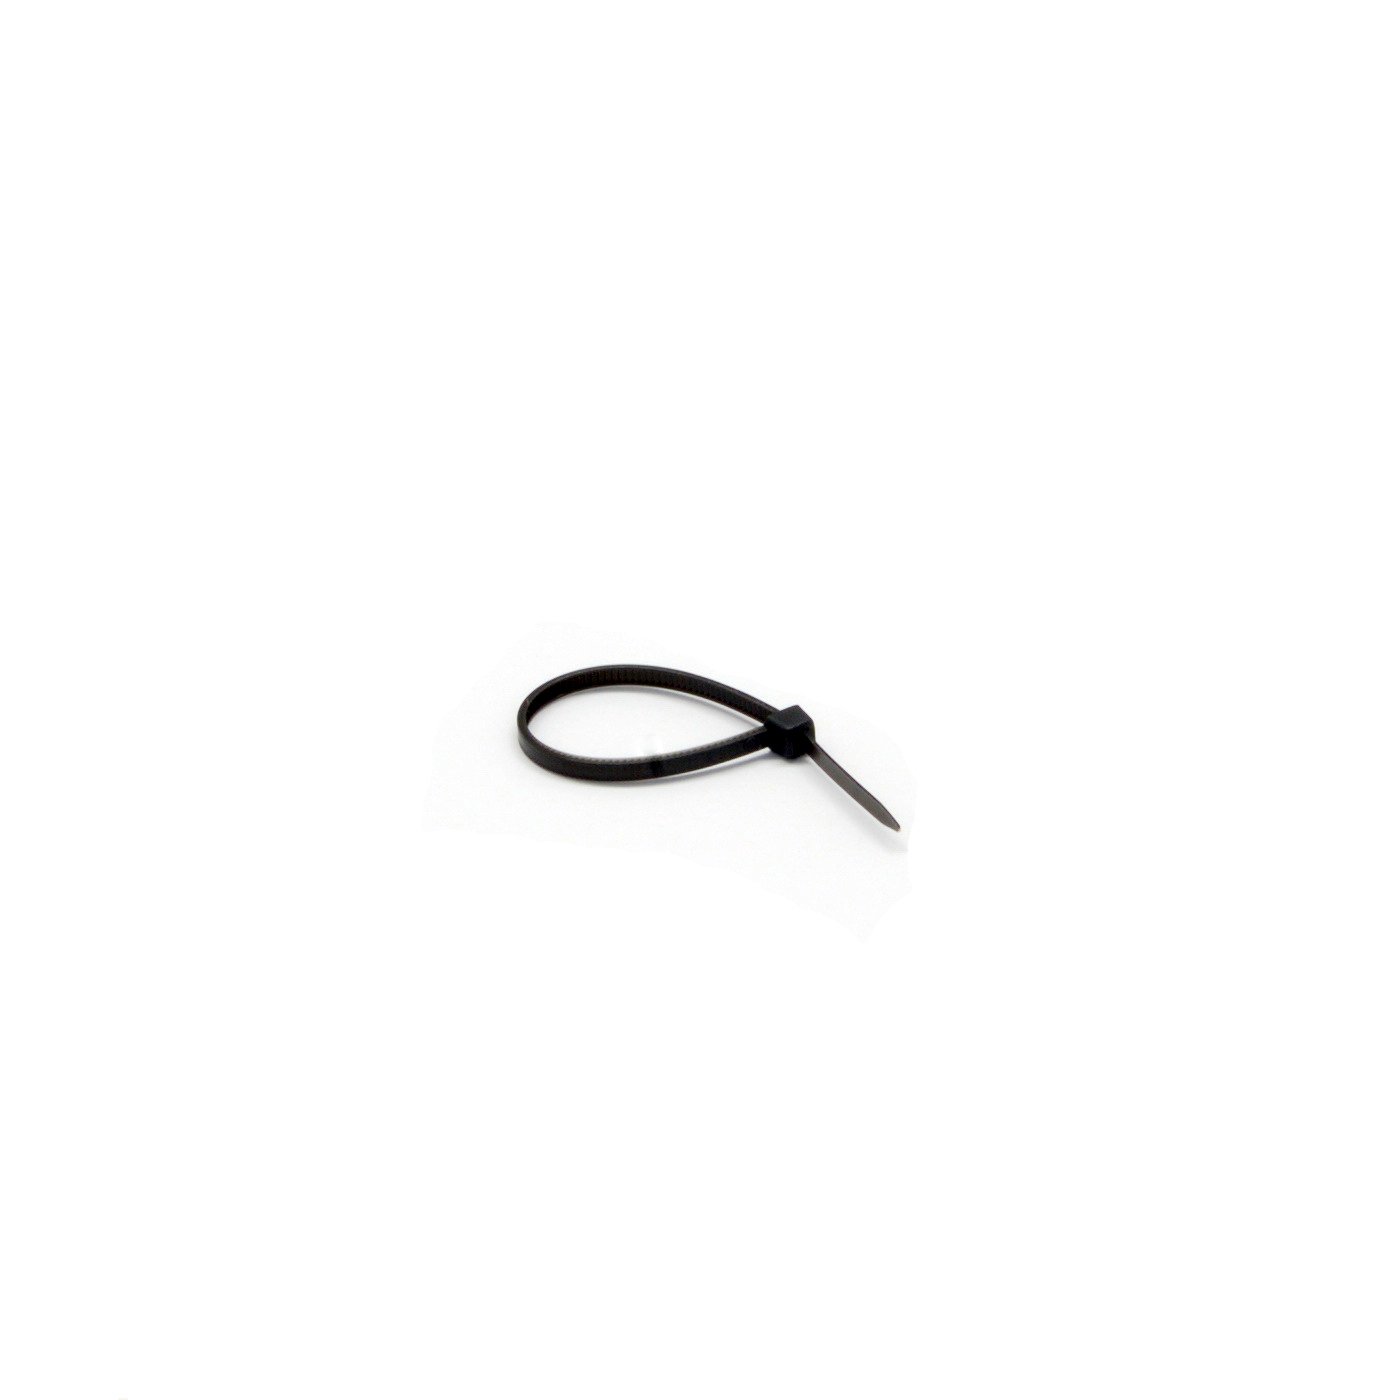 Nylon Cable Tie, Black, 18 pound weight limit, 100 Pieces, 4 inch